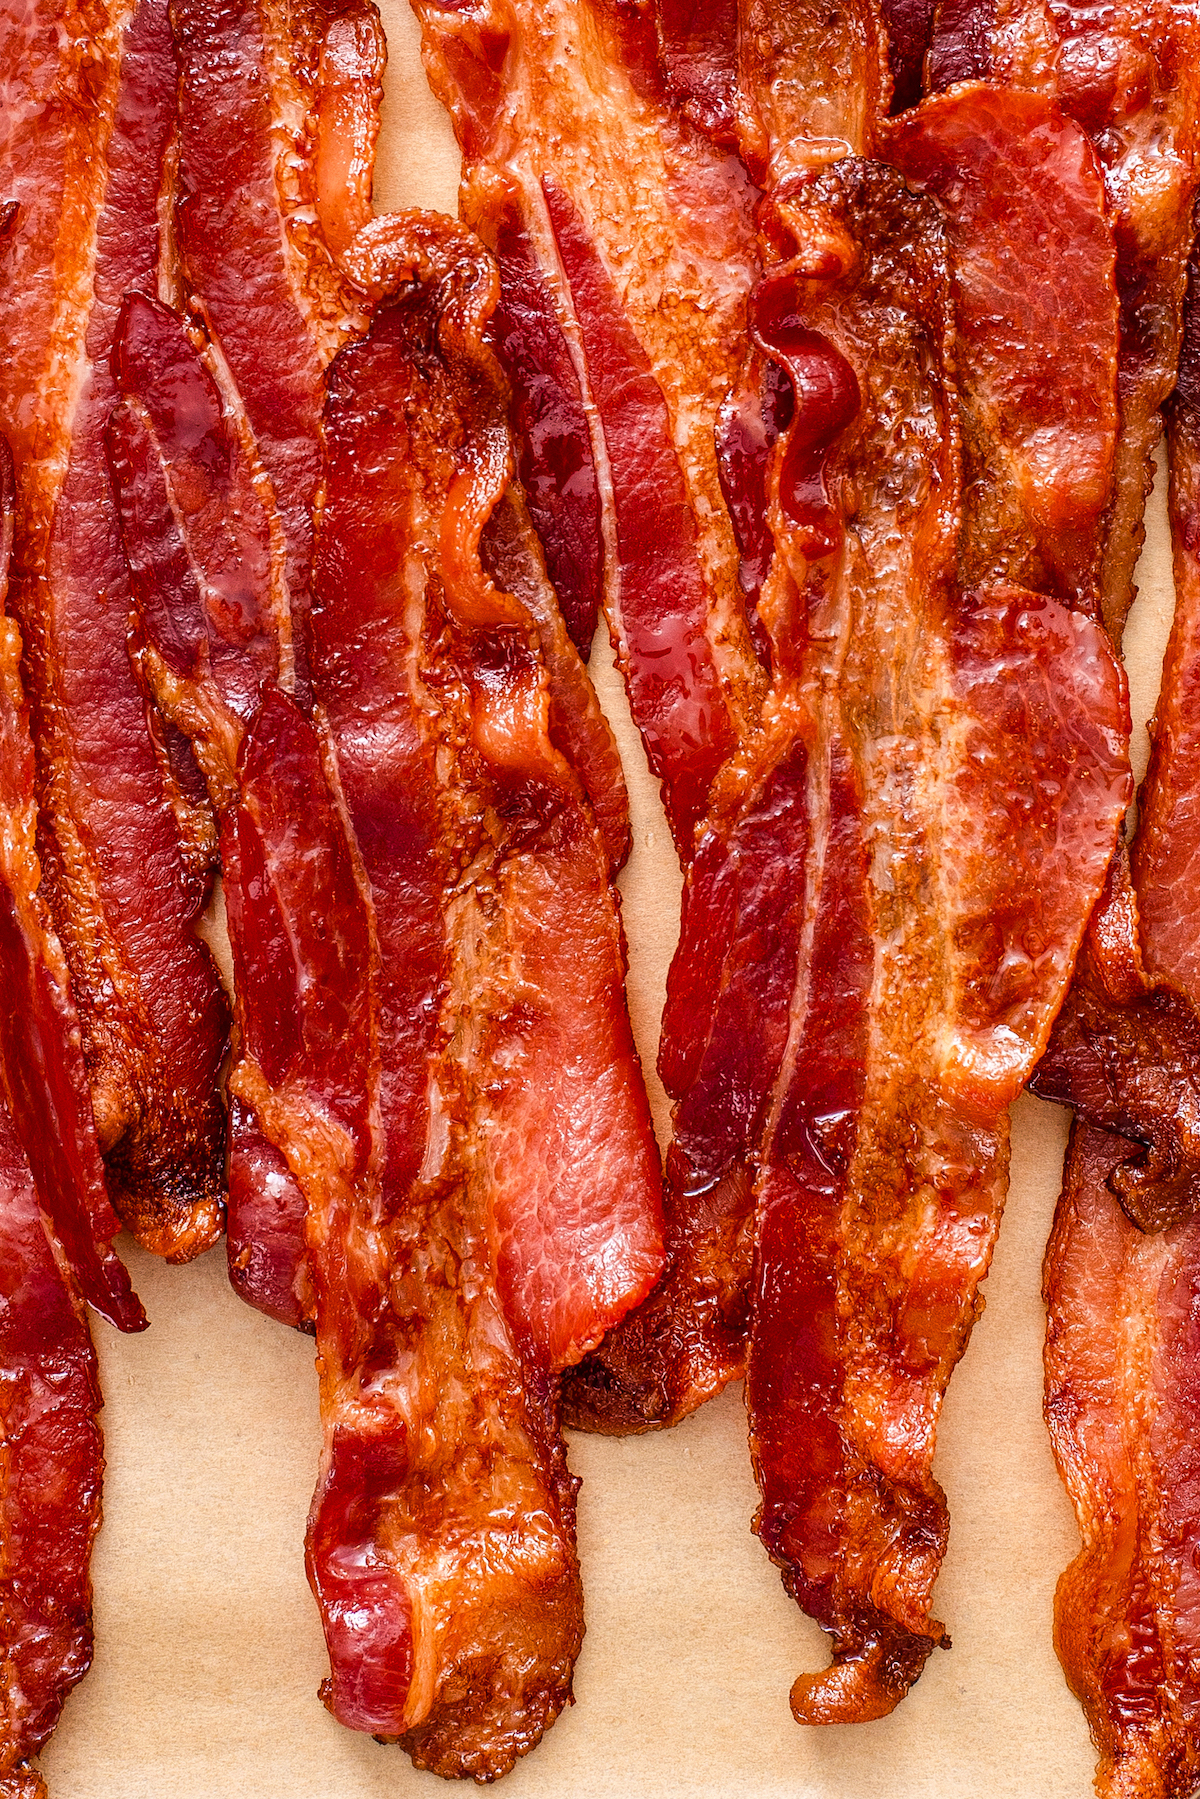 Up close image of strips of oven baked bacon.